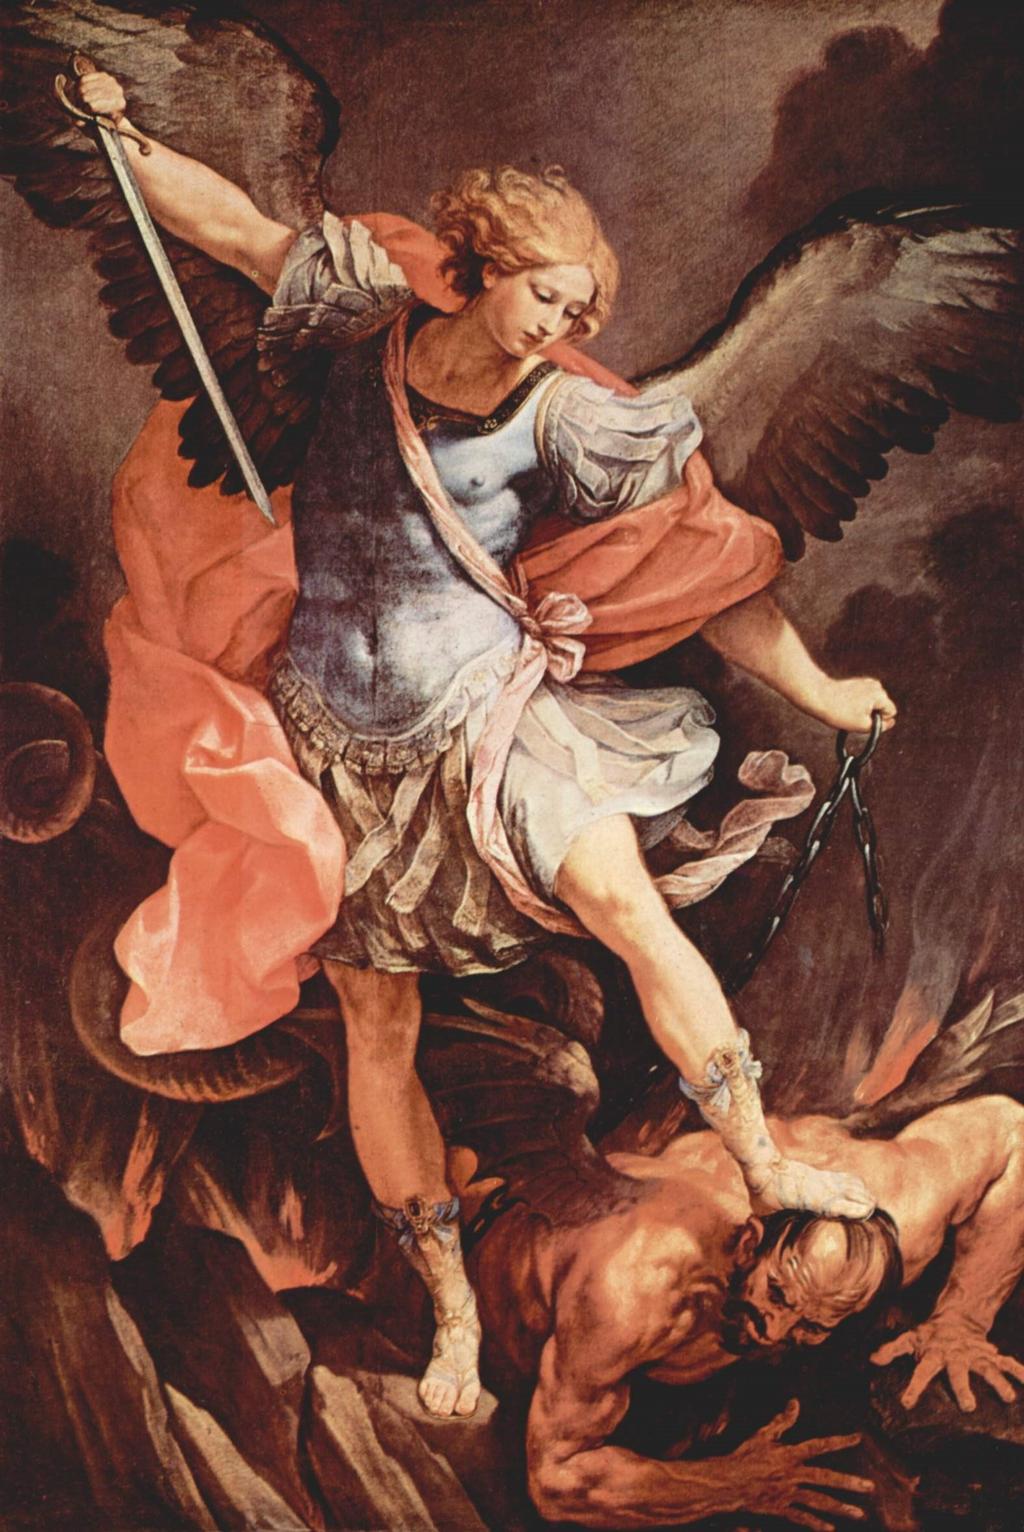 Michael is described in the book of Daniel and in the Book of Revelation as the great defender in the spiritual battles of our time.